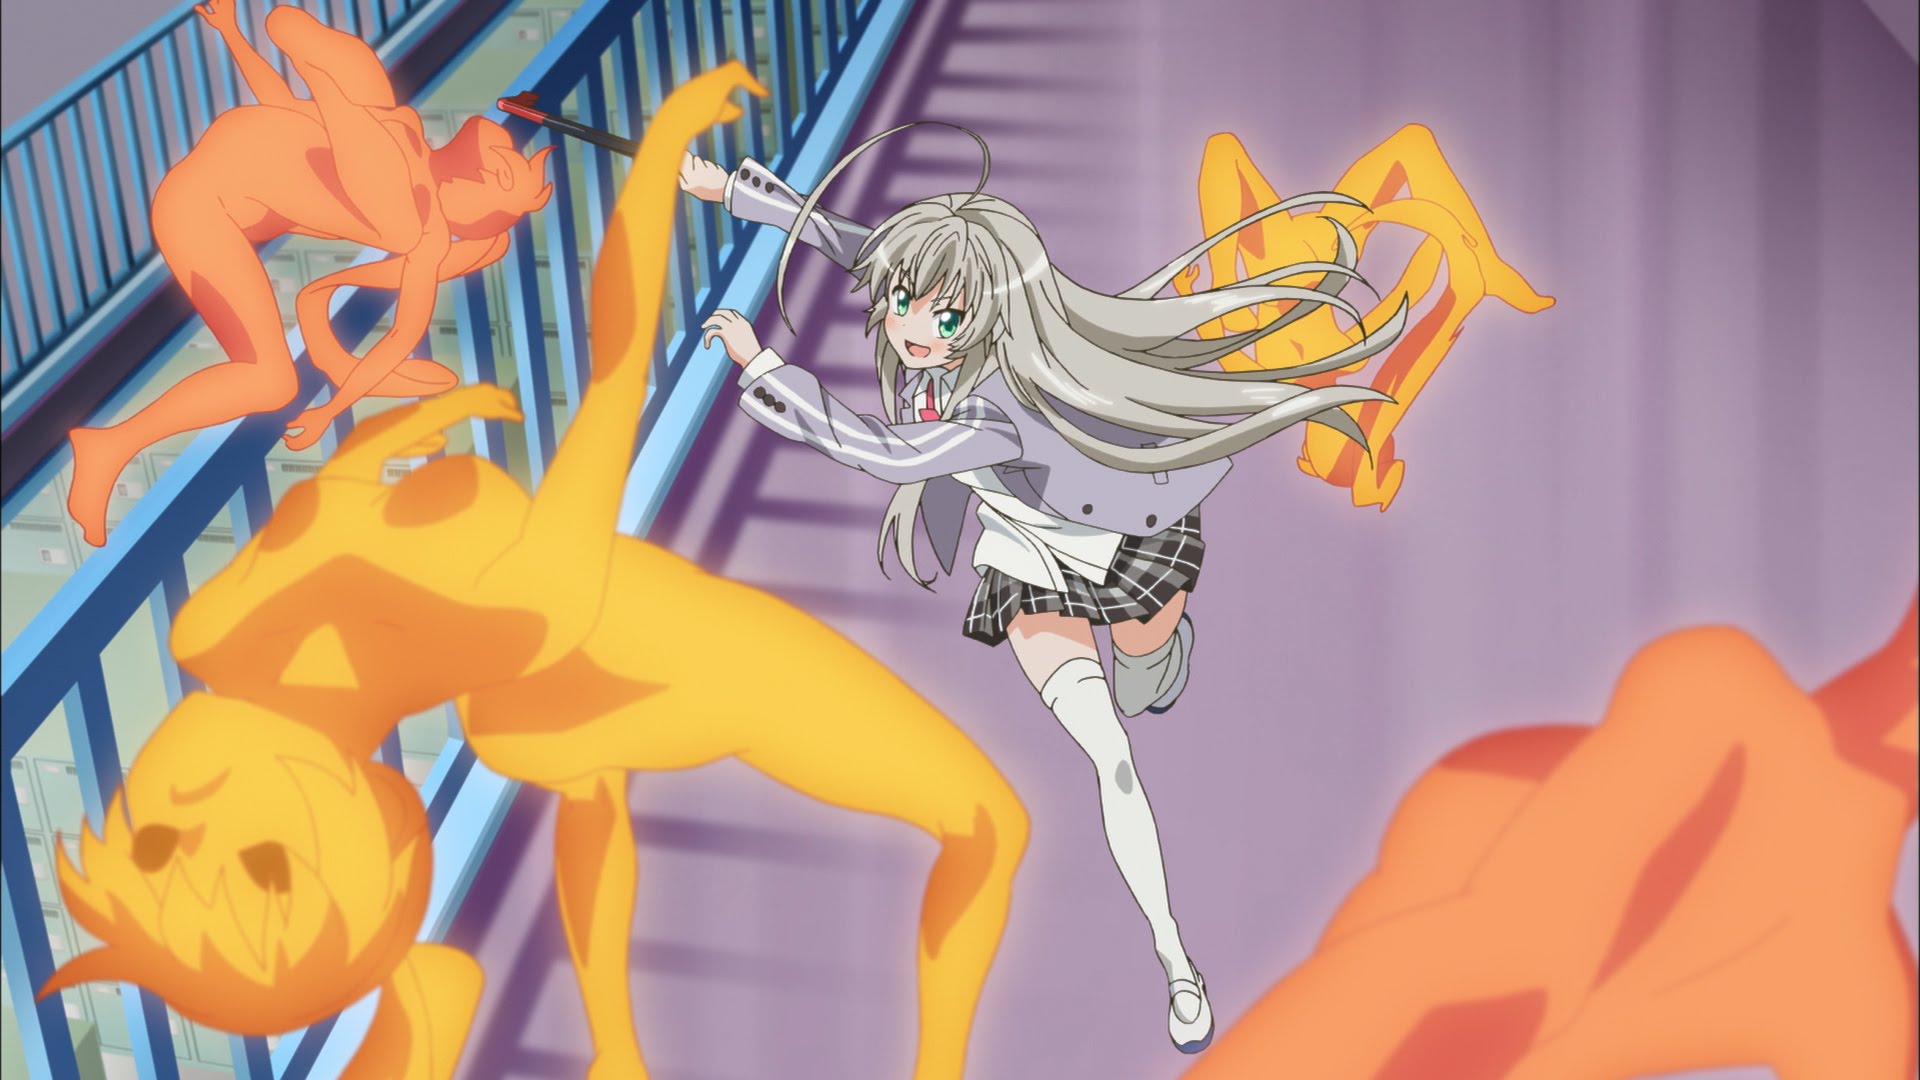 Nyaruko: Crawling With Love! Backgrounds, Compatible - PC, Mobile, Gadgets| 1920x1080 px